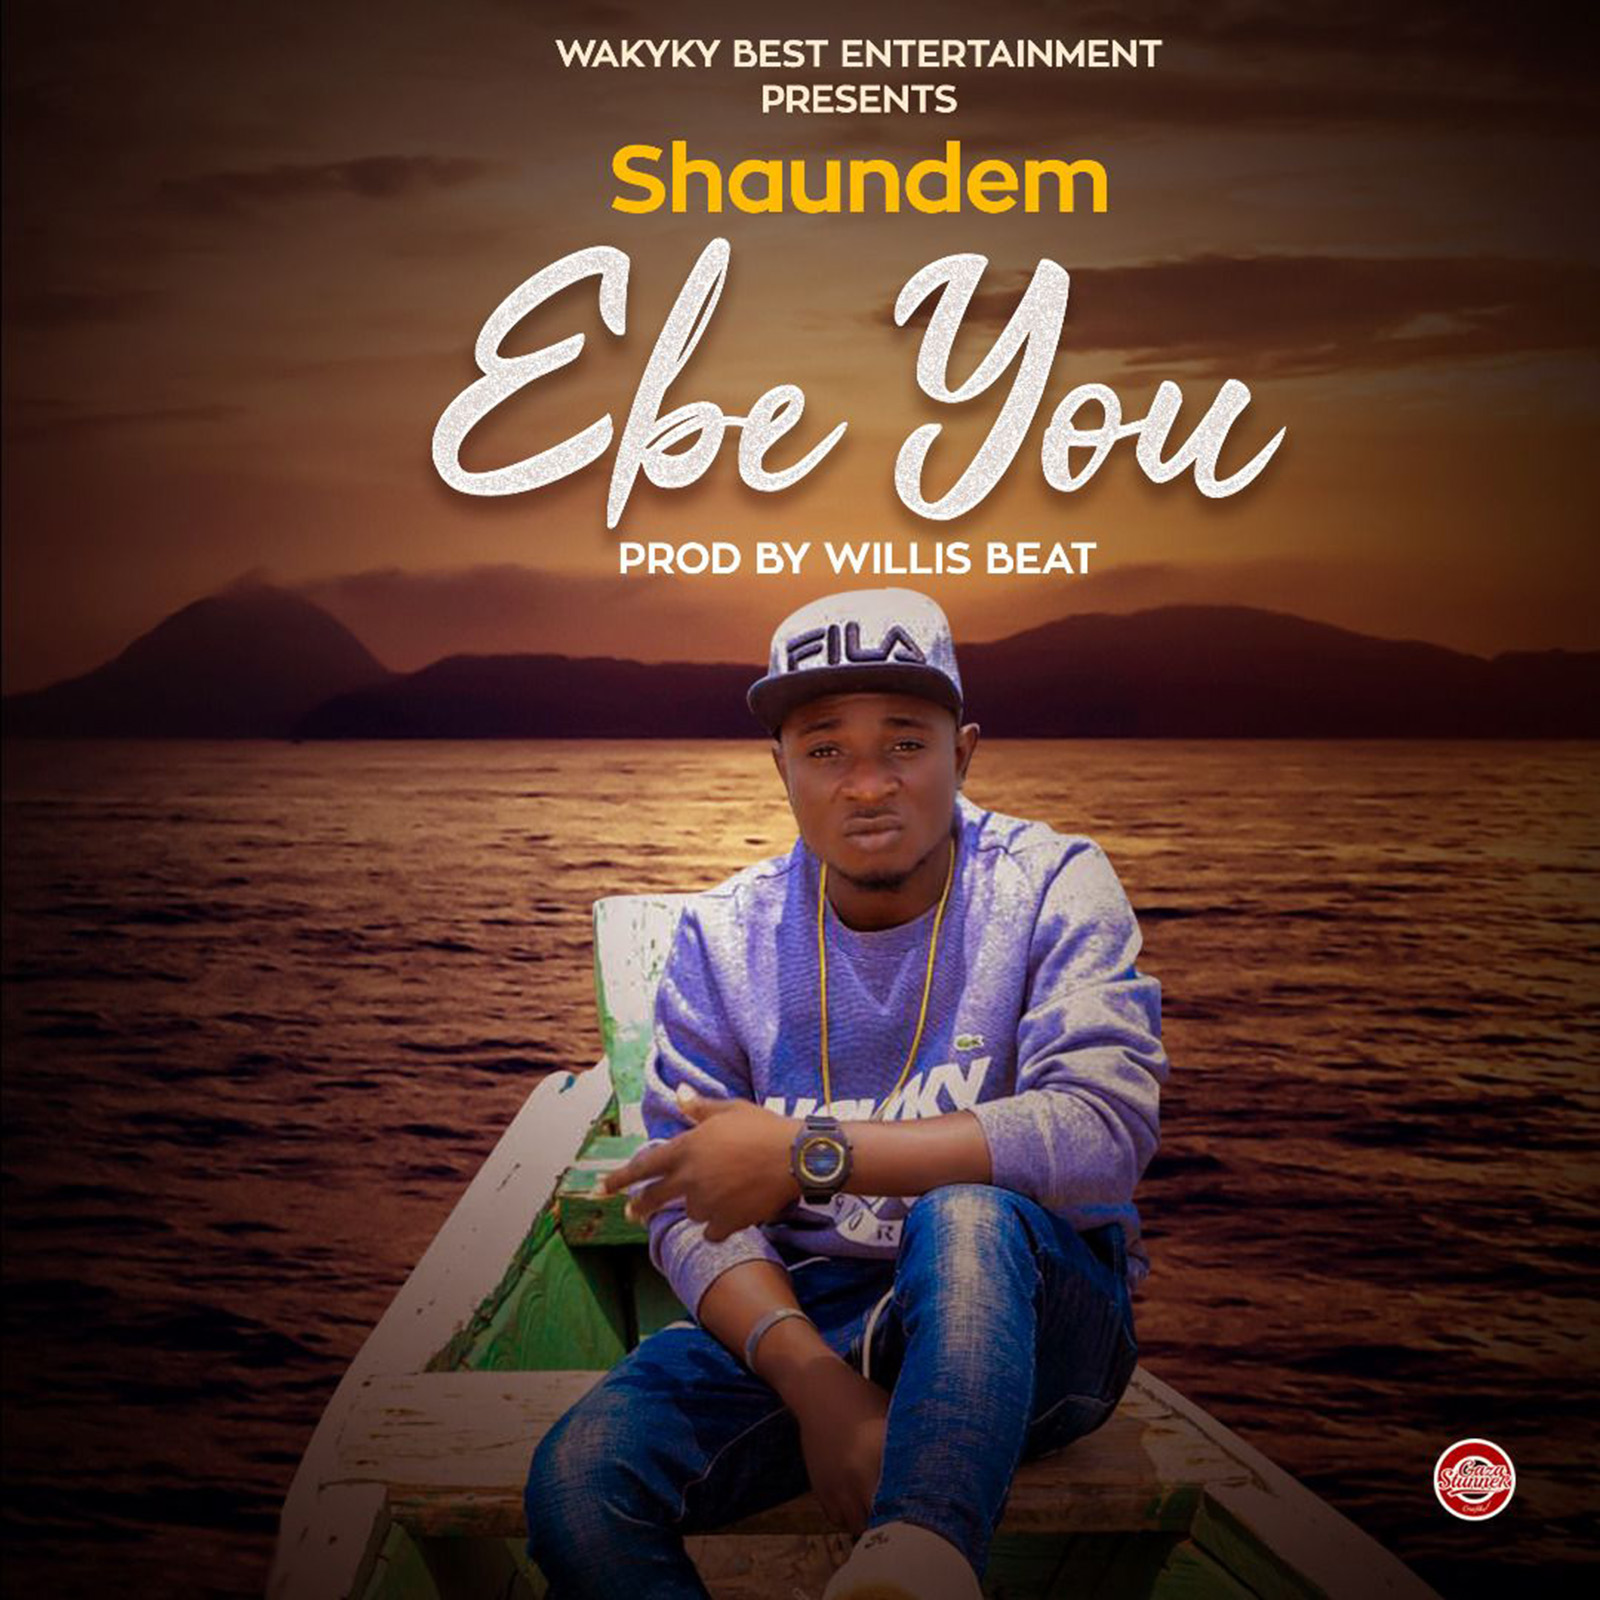 Ebe You by Shaundem